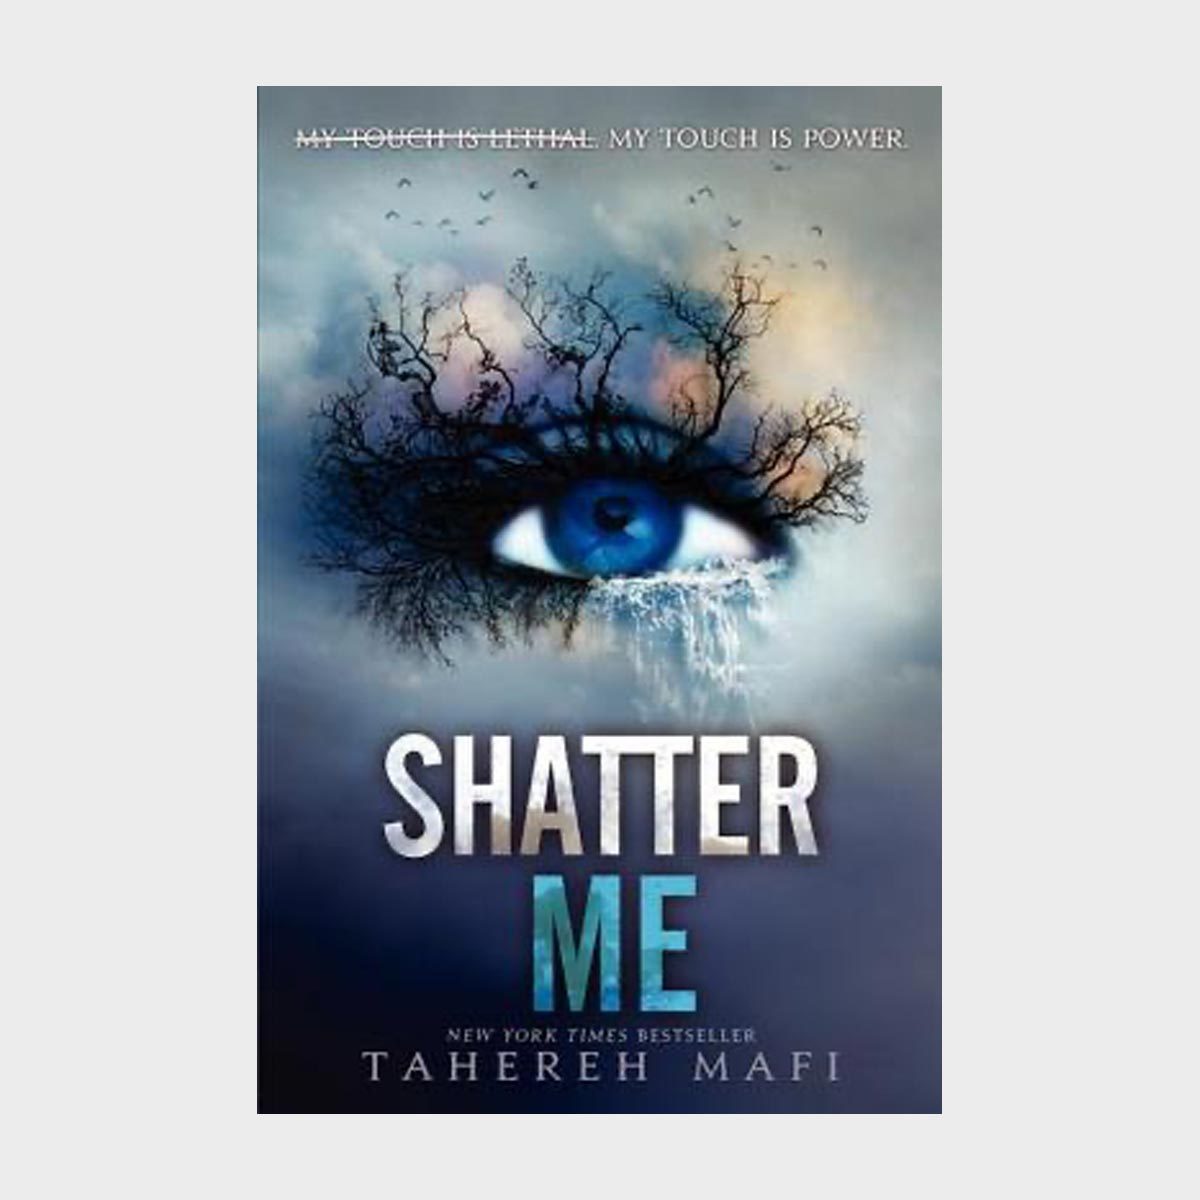 <p class=""><strong>Series starter:</strong> <a href="https://bookshop.org/p/books/shatter-me-tahereh-mafi/7959047" rel="noopener noreferrer"><em>Shatter Me</em></a></p> <p class=""><strong>What you're in for:</strong> Incredible prose and yearning romance</p> <p>Here's an oldie but a goodie for readers who gobble up romance book series. Tahereh Mafi's <a href="https://www.rd.com/list/dystopian-books/" rel="noopener noreferrer">dystopian novels</a> are heavy with yearning, which may be why the young adult series has recently seen a resurgence on BookTok. The first book published in 2011 and was followed by five more novels and a handful of novellas. So what's caught everyone's attention (again)? Seventeen-year-old Juliette has been locked away by the Reestablishment and told she's cursed: Anyone she touches dies. But then there's Adam, handsome and steely and understanding, who becomes Juliette's cellmate. Soon after, the two begin to learn there's more to the Reestablishment than what they've been told. And there's more to the romance than a simple Adam-Juliette bond (hello, Warner).</p> <p class="listicle-page__cta-button-shop"><a class="shop-btn" href="https://bookshop.org/p/books/shatter-me-tahereh-mafi/7959047">Shop Now</a></p>